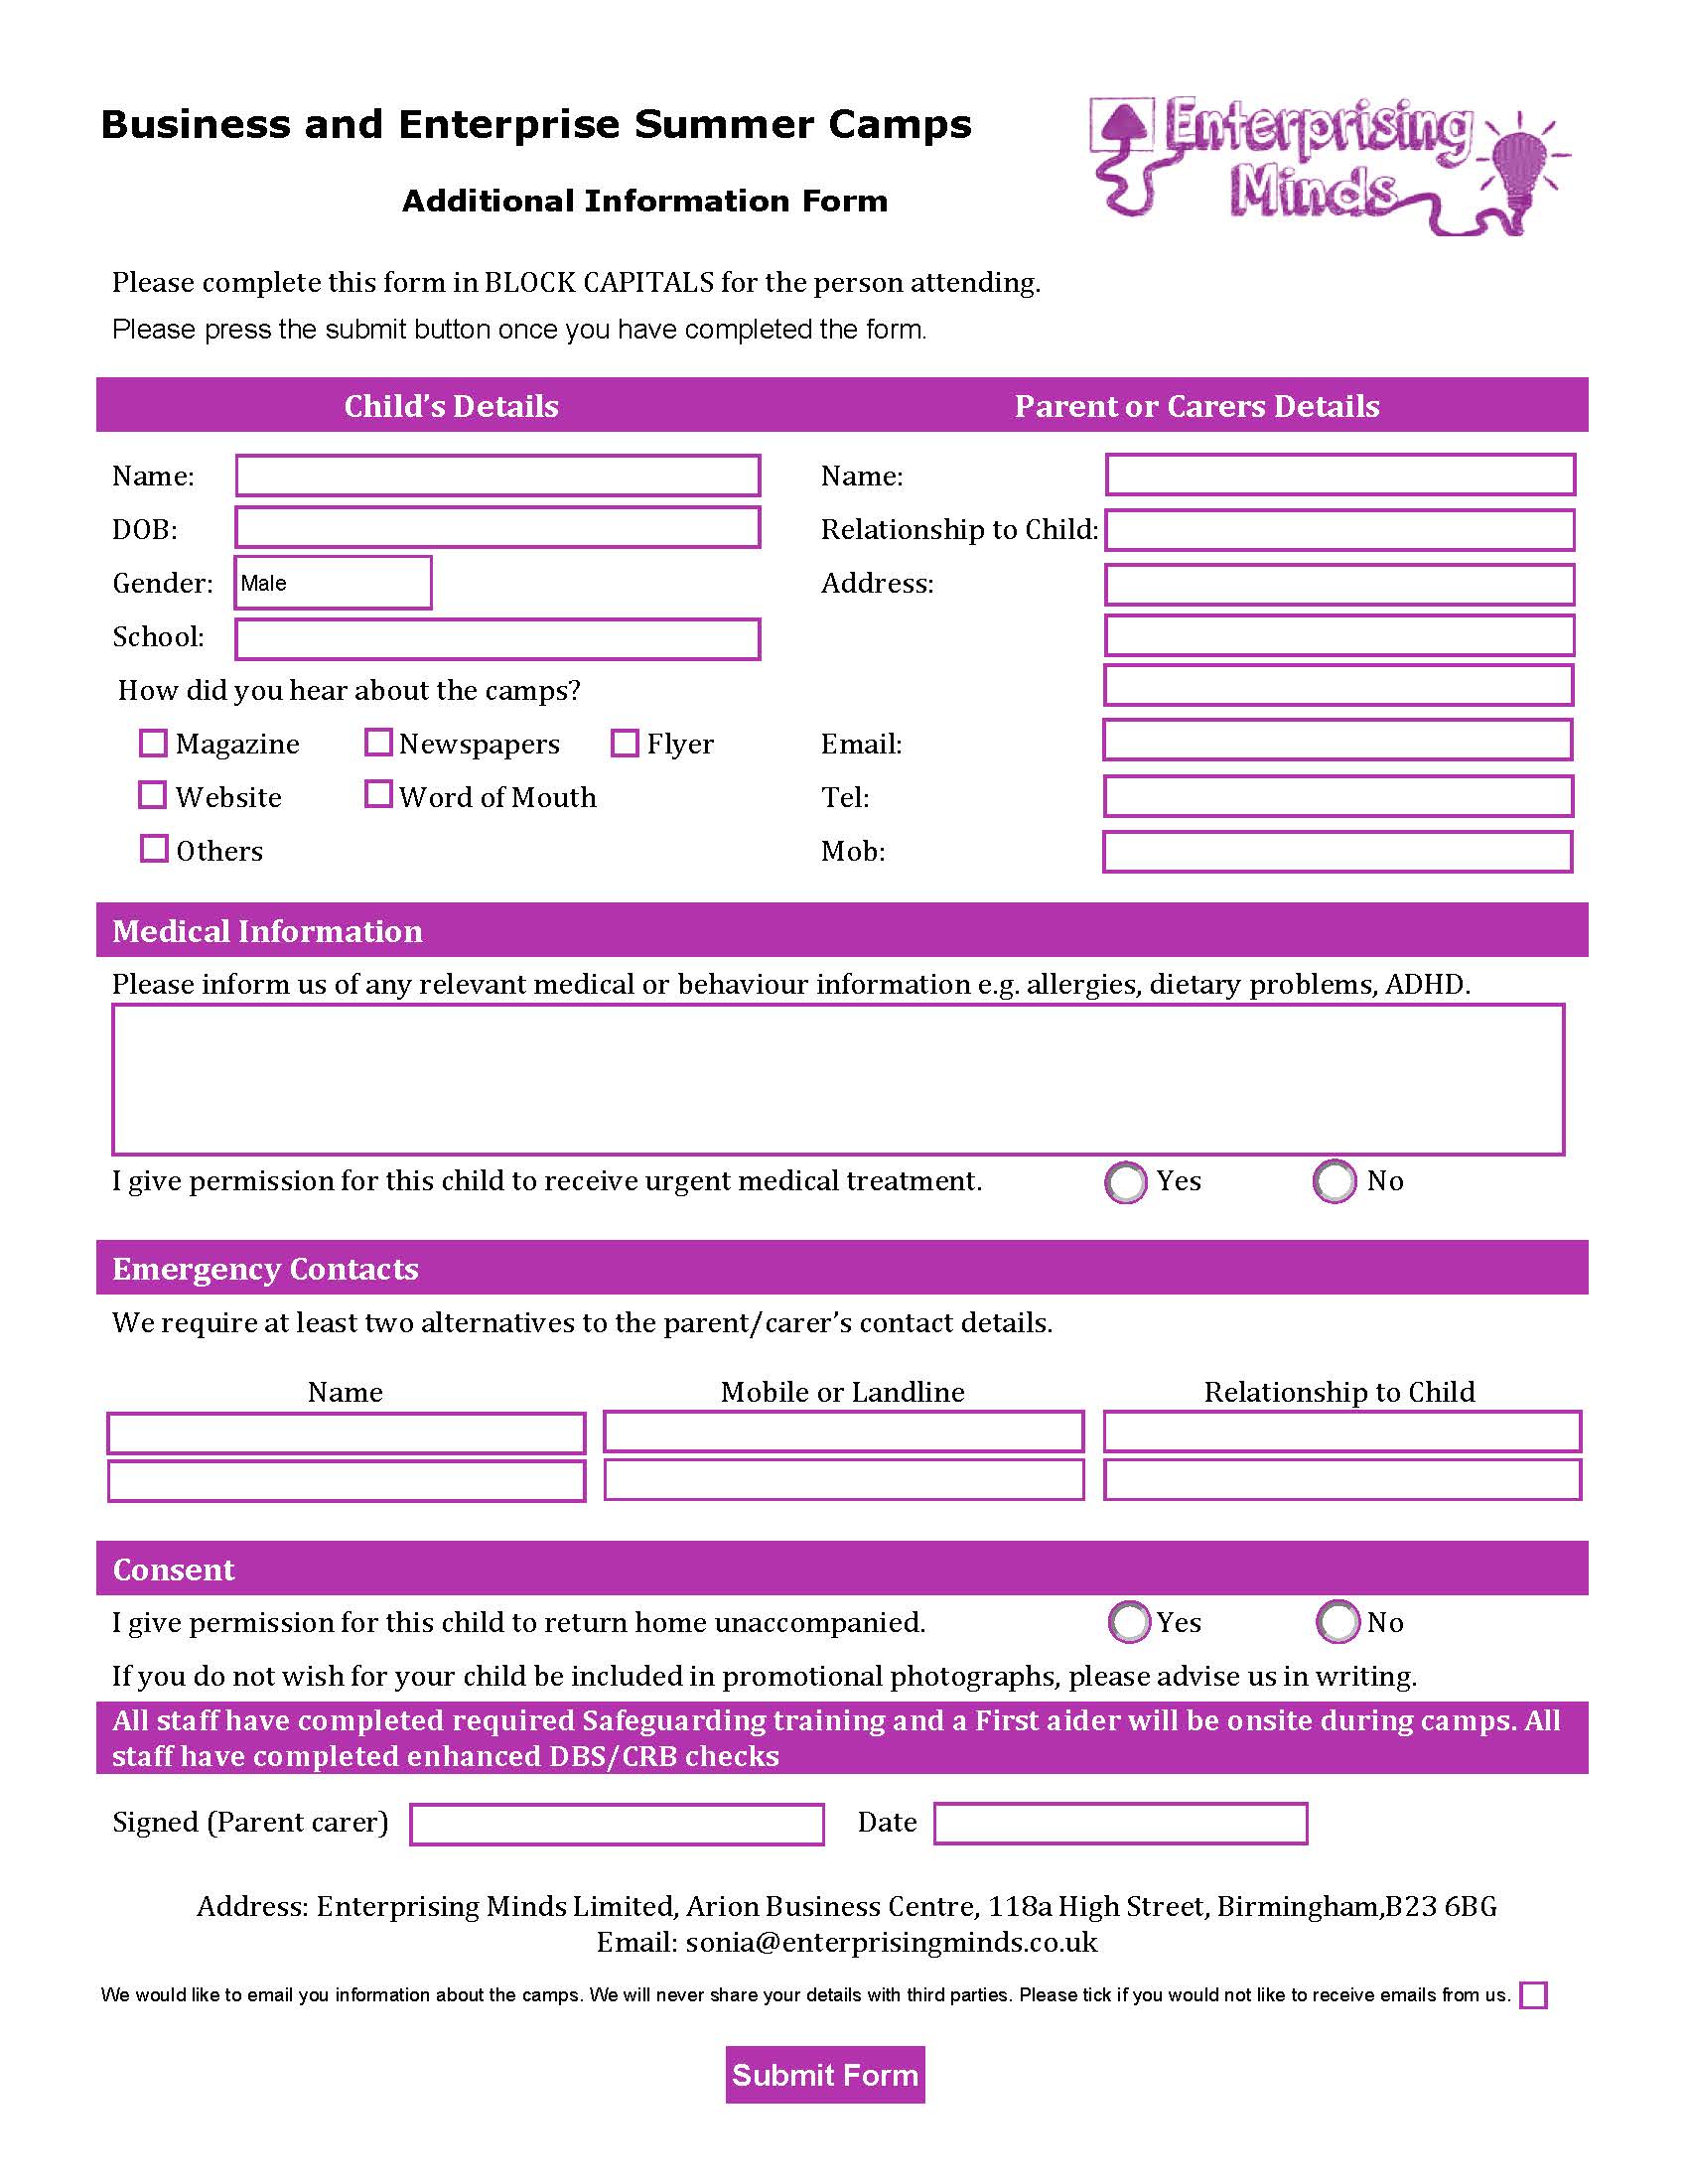 free fillable form creator